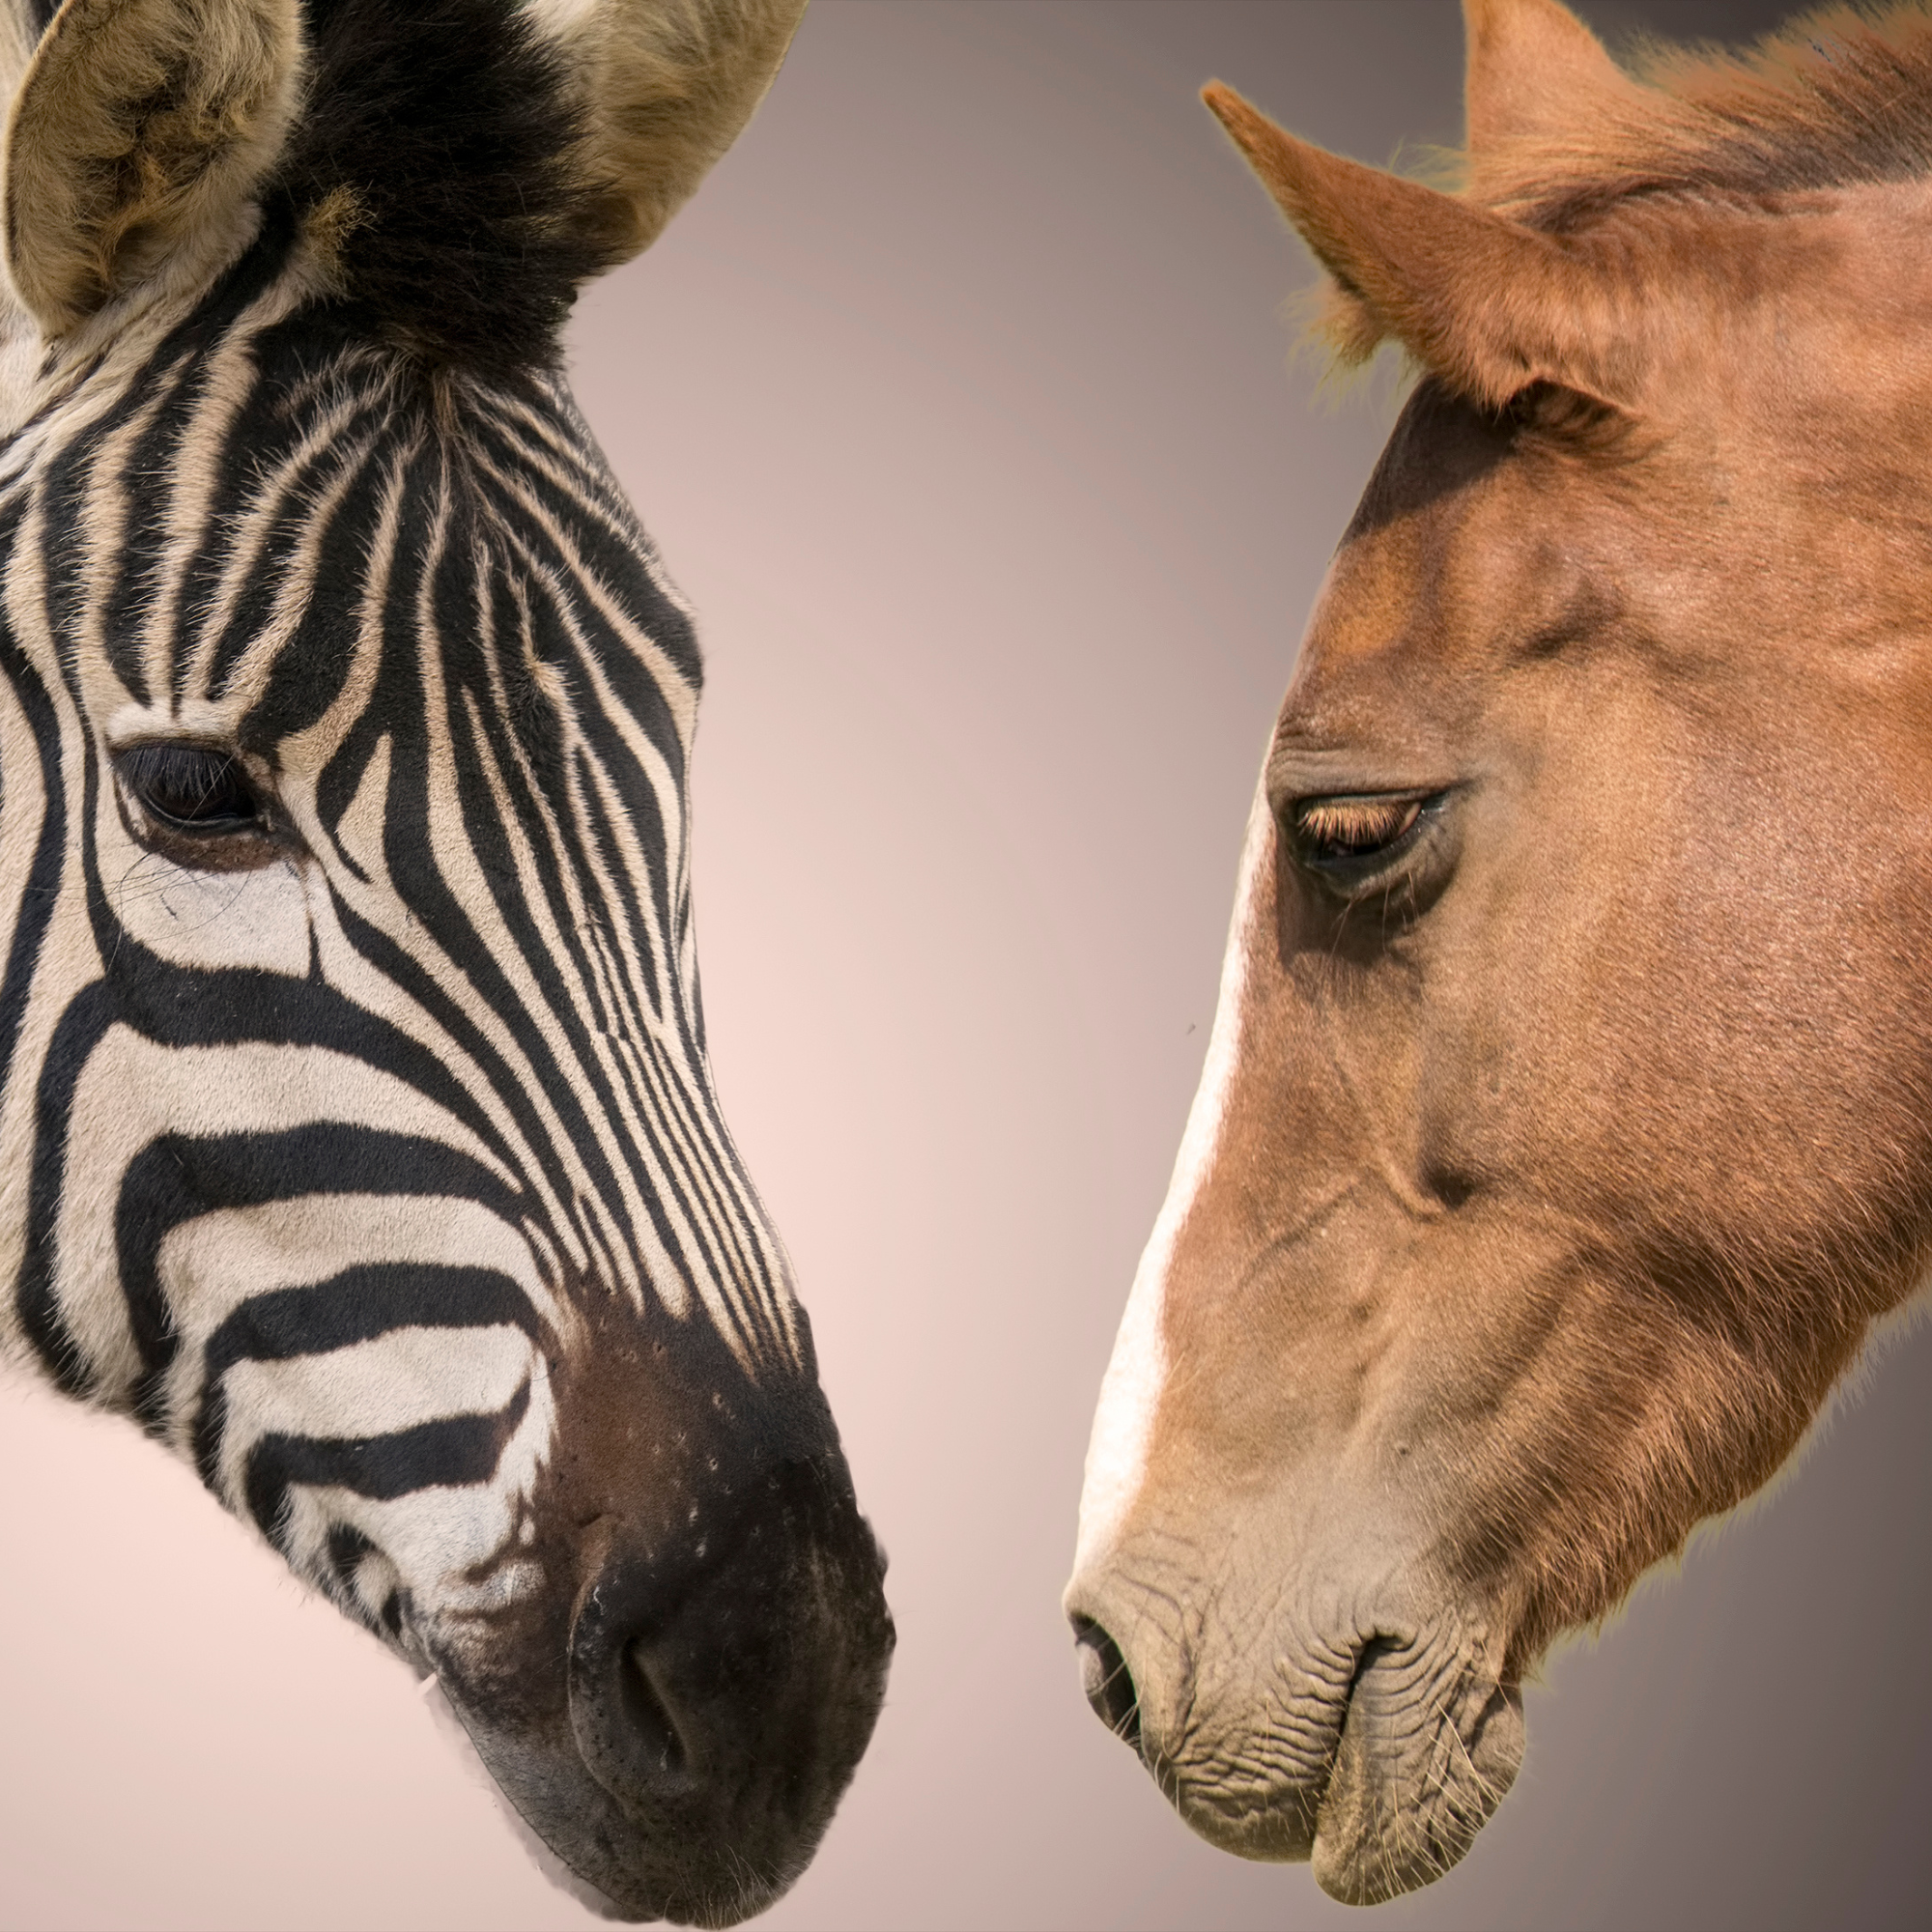 Could You Ride a Zebra the Same Way You Ride a Horse?